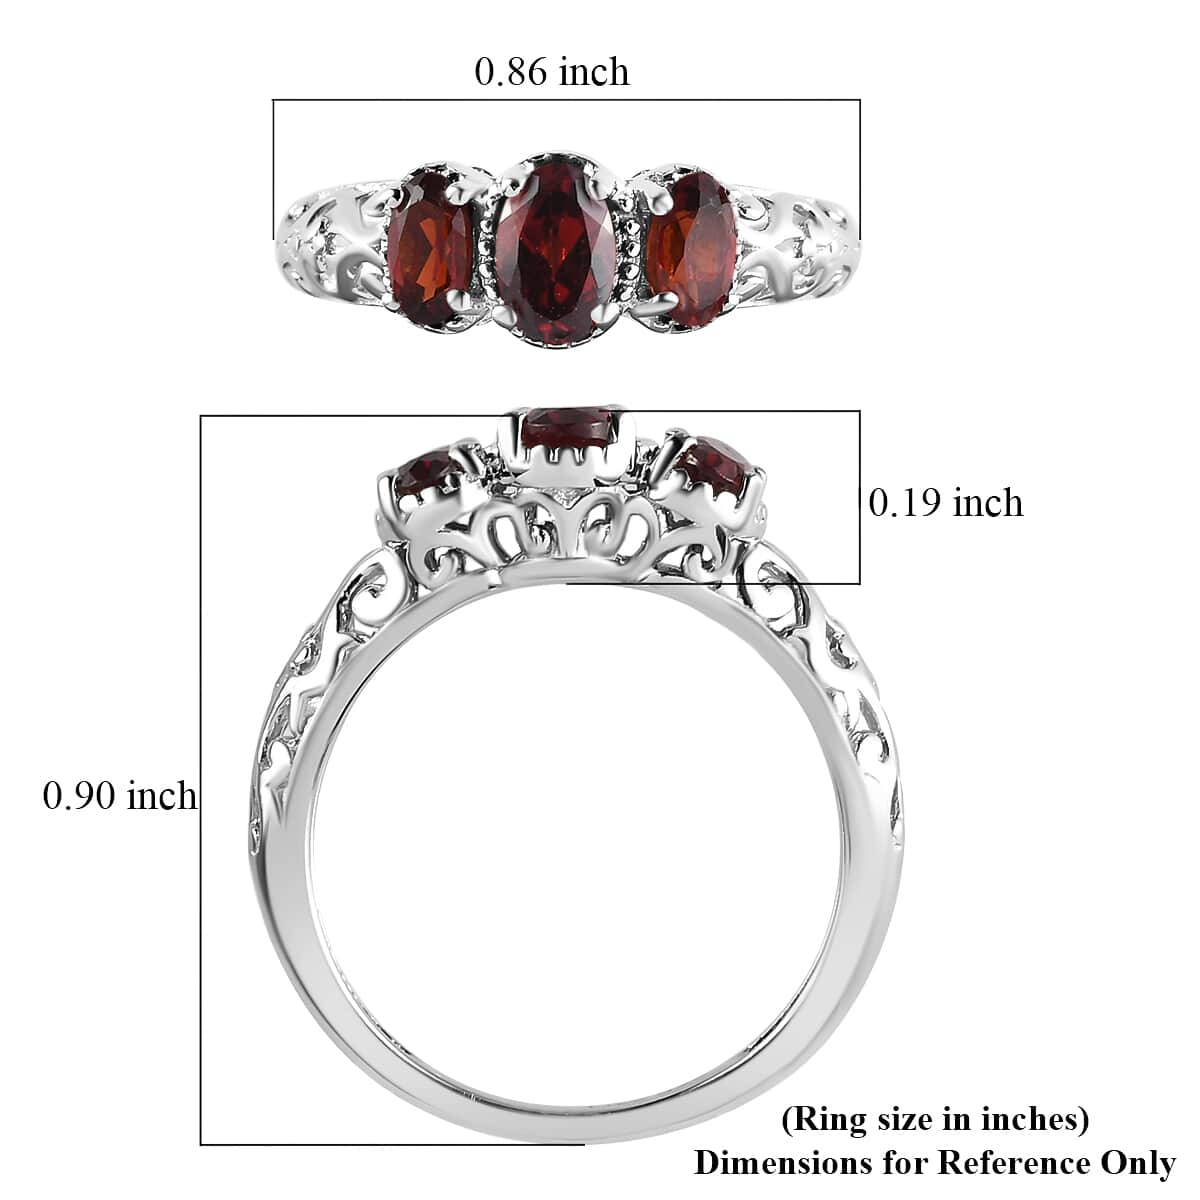 Garnet Ring, 3 Stone Garnet Ring, Trilogy Ring, Sterling Silver Ring, Birthstone Jewelry, Mozambique Garnet 3 Stone Ring 1.15 ctw (Size 6.0) image number 7